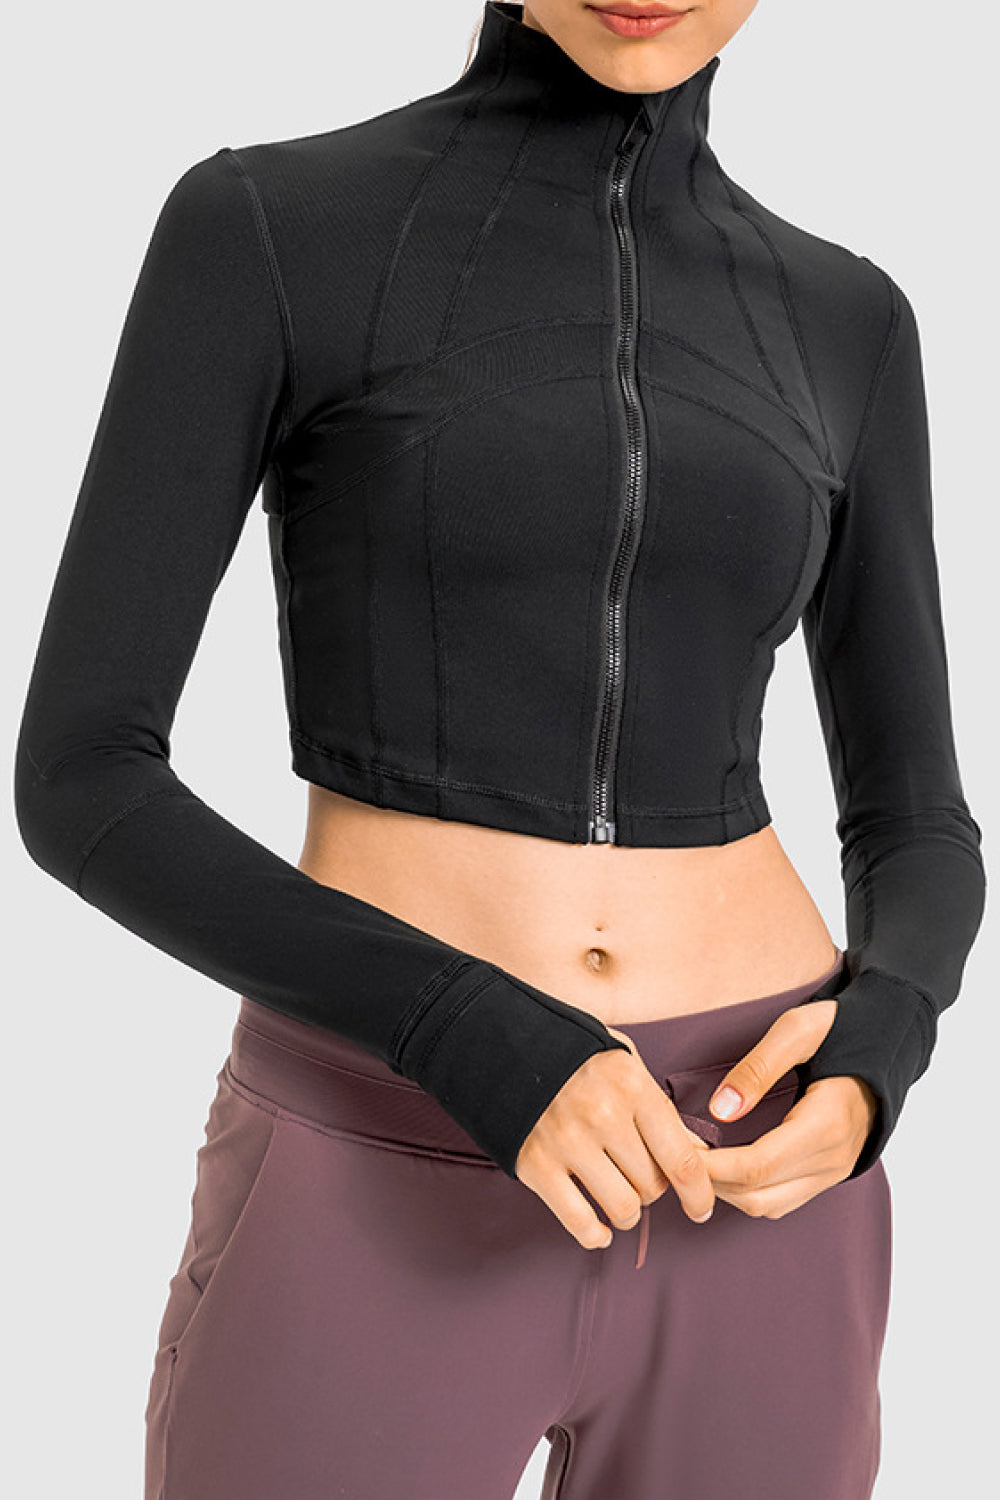 Zip Front Cropped Sports Jacket - Black / 2 - Women’s Clothing & Accessories - Shirts & Tops - 14 - 2024